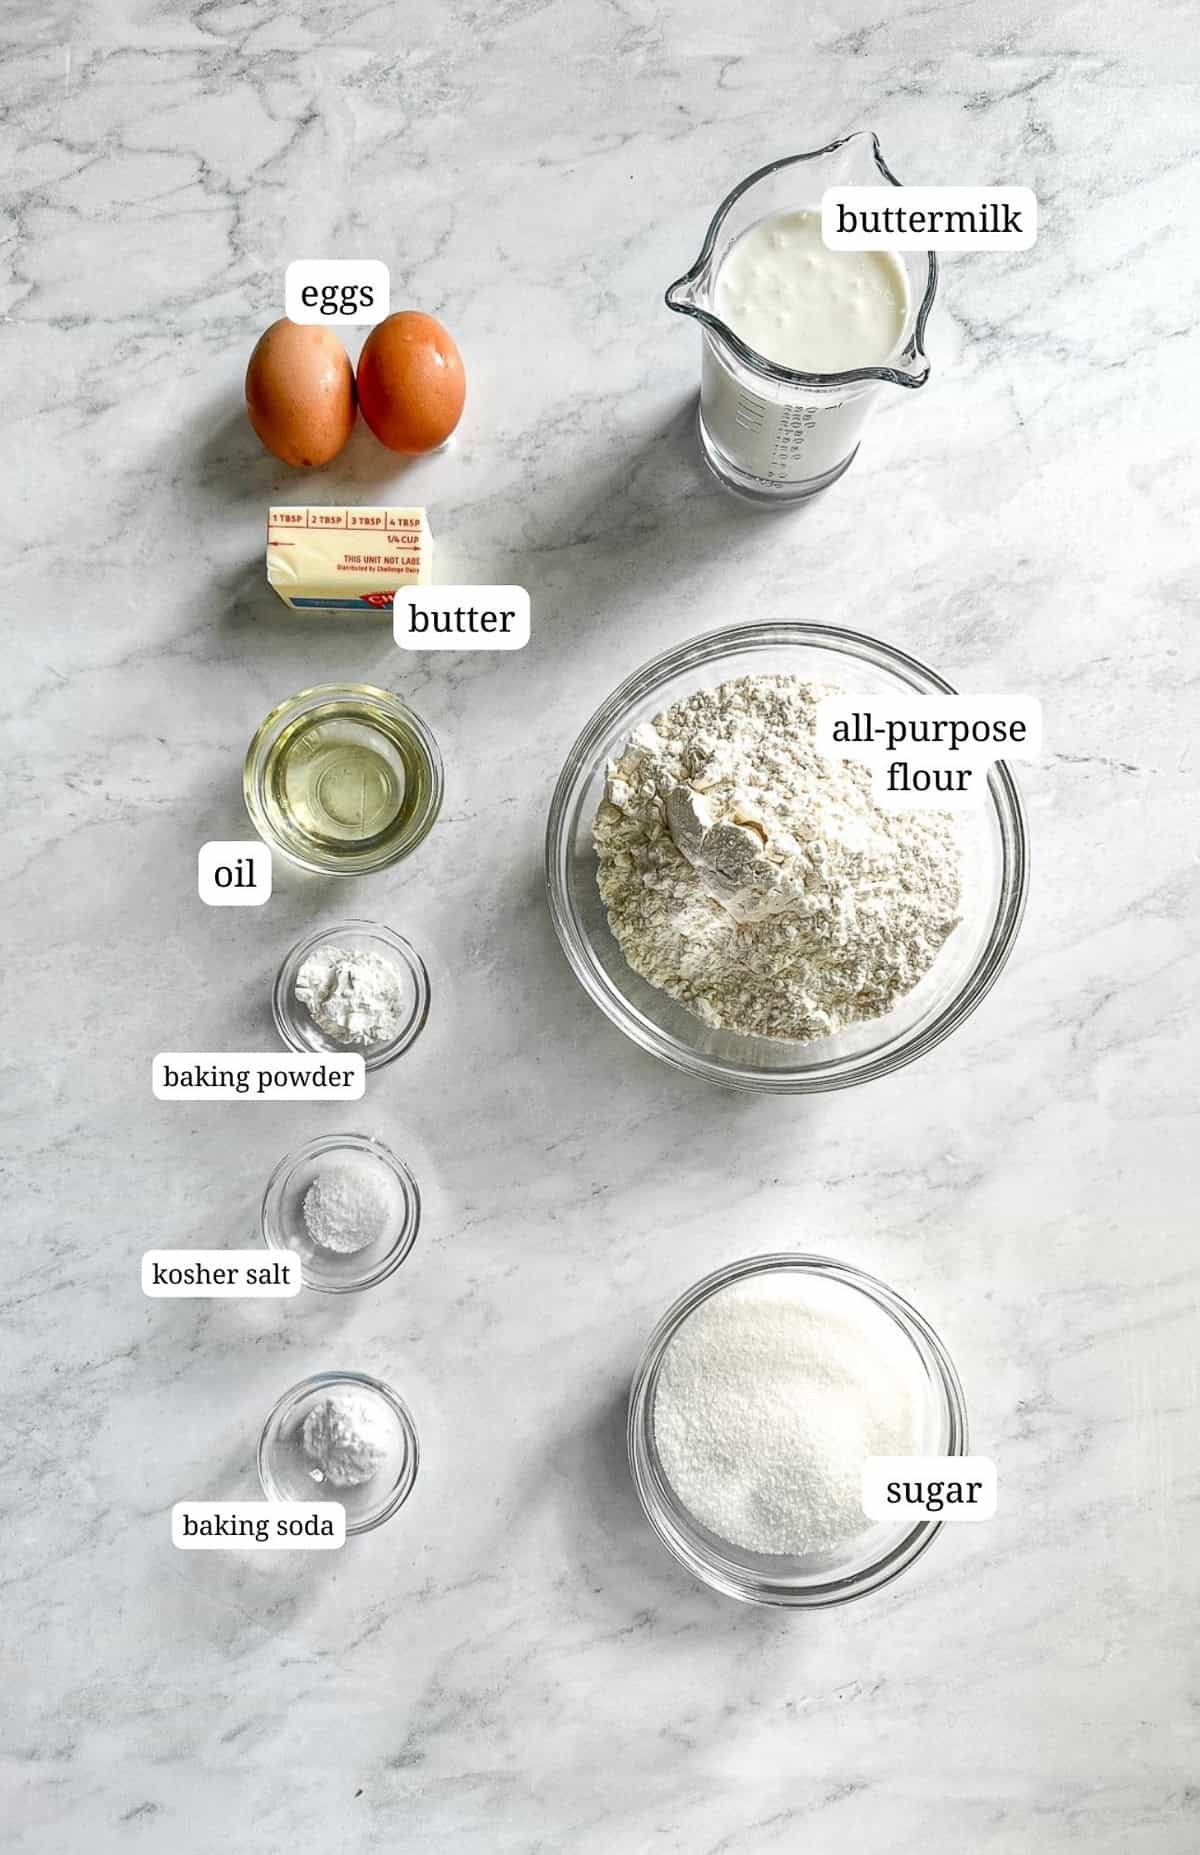 Labeled image of ingredients needed to make basic buttermilk muffins.